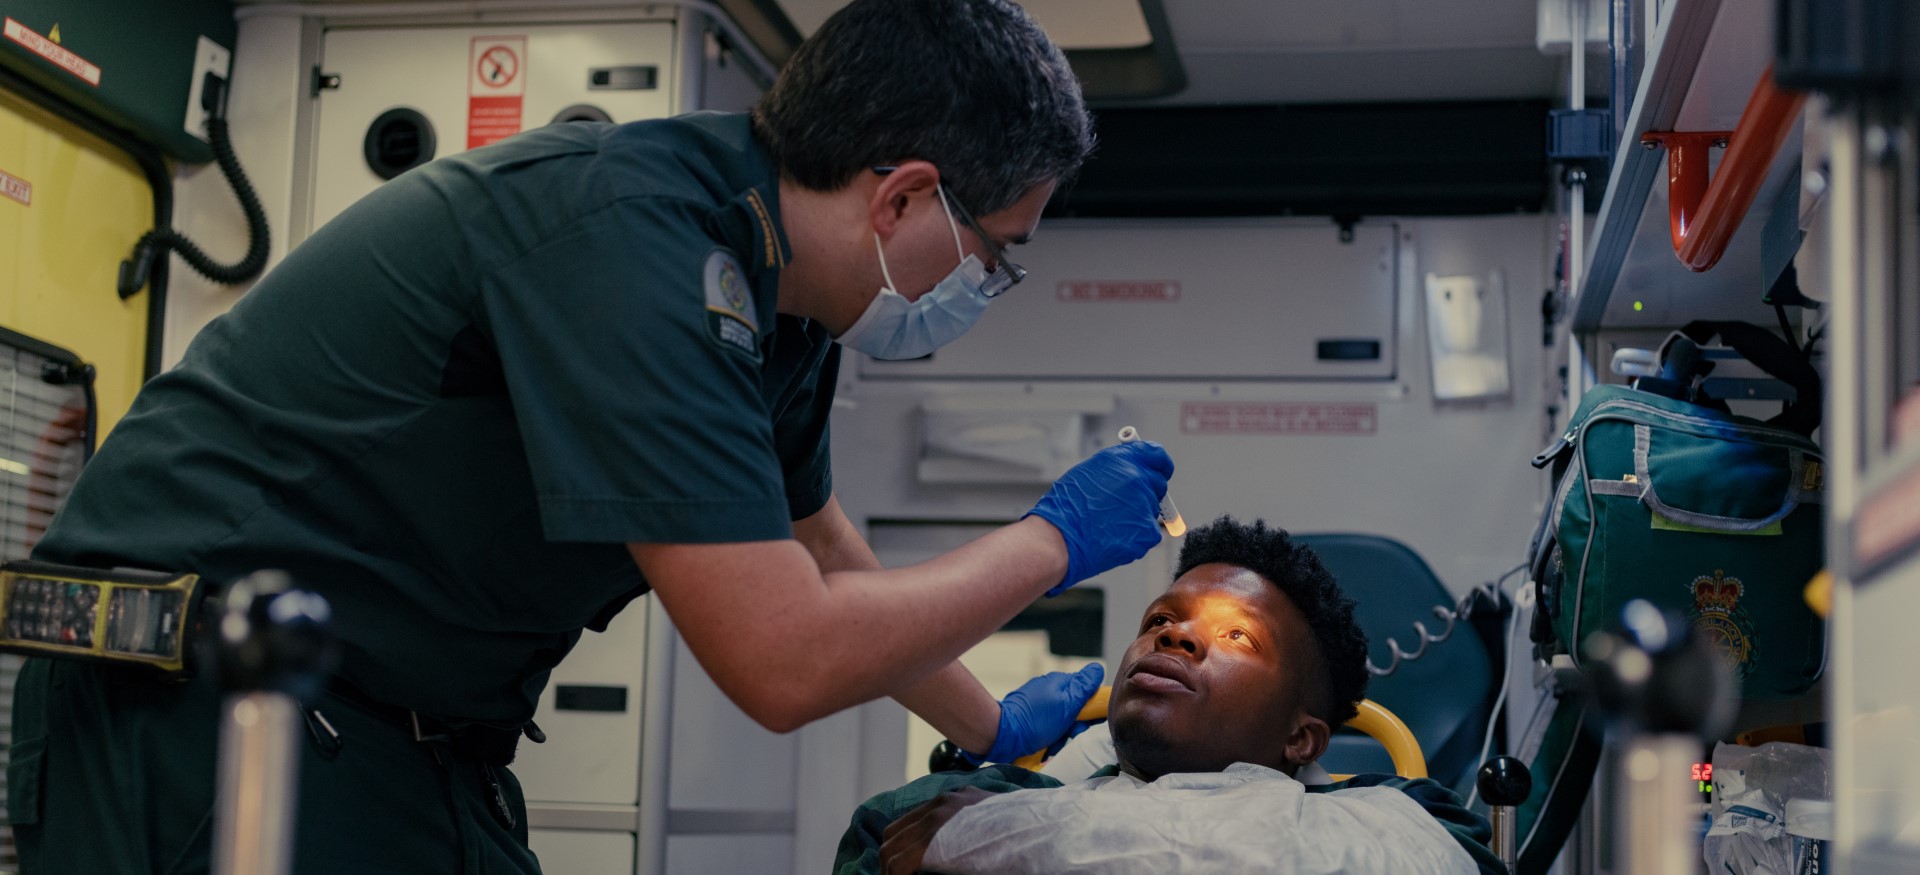 Paramedic treating patient in an ambulance